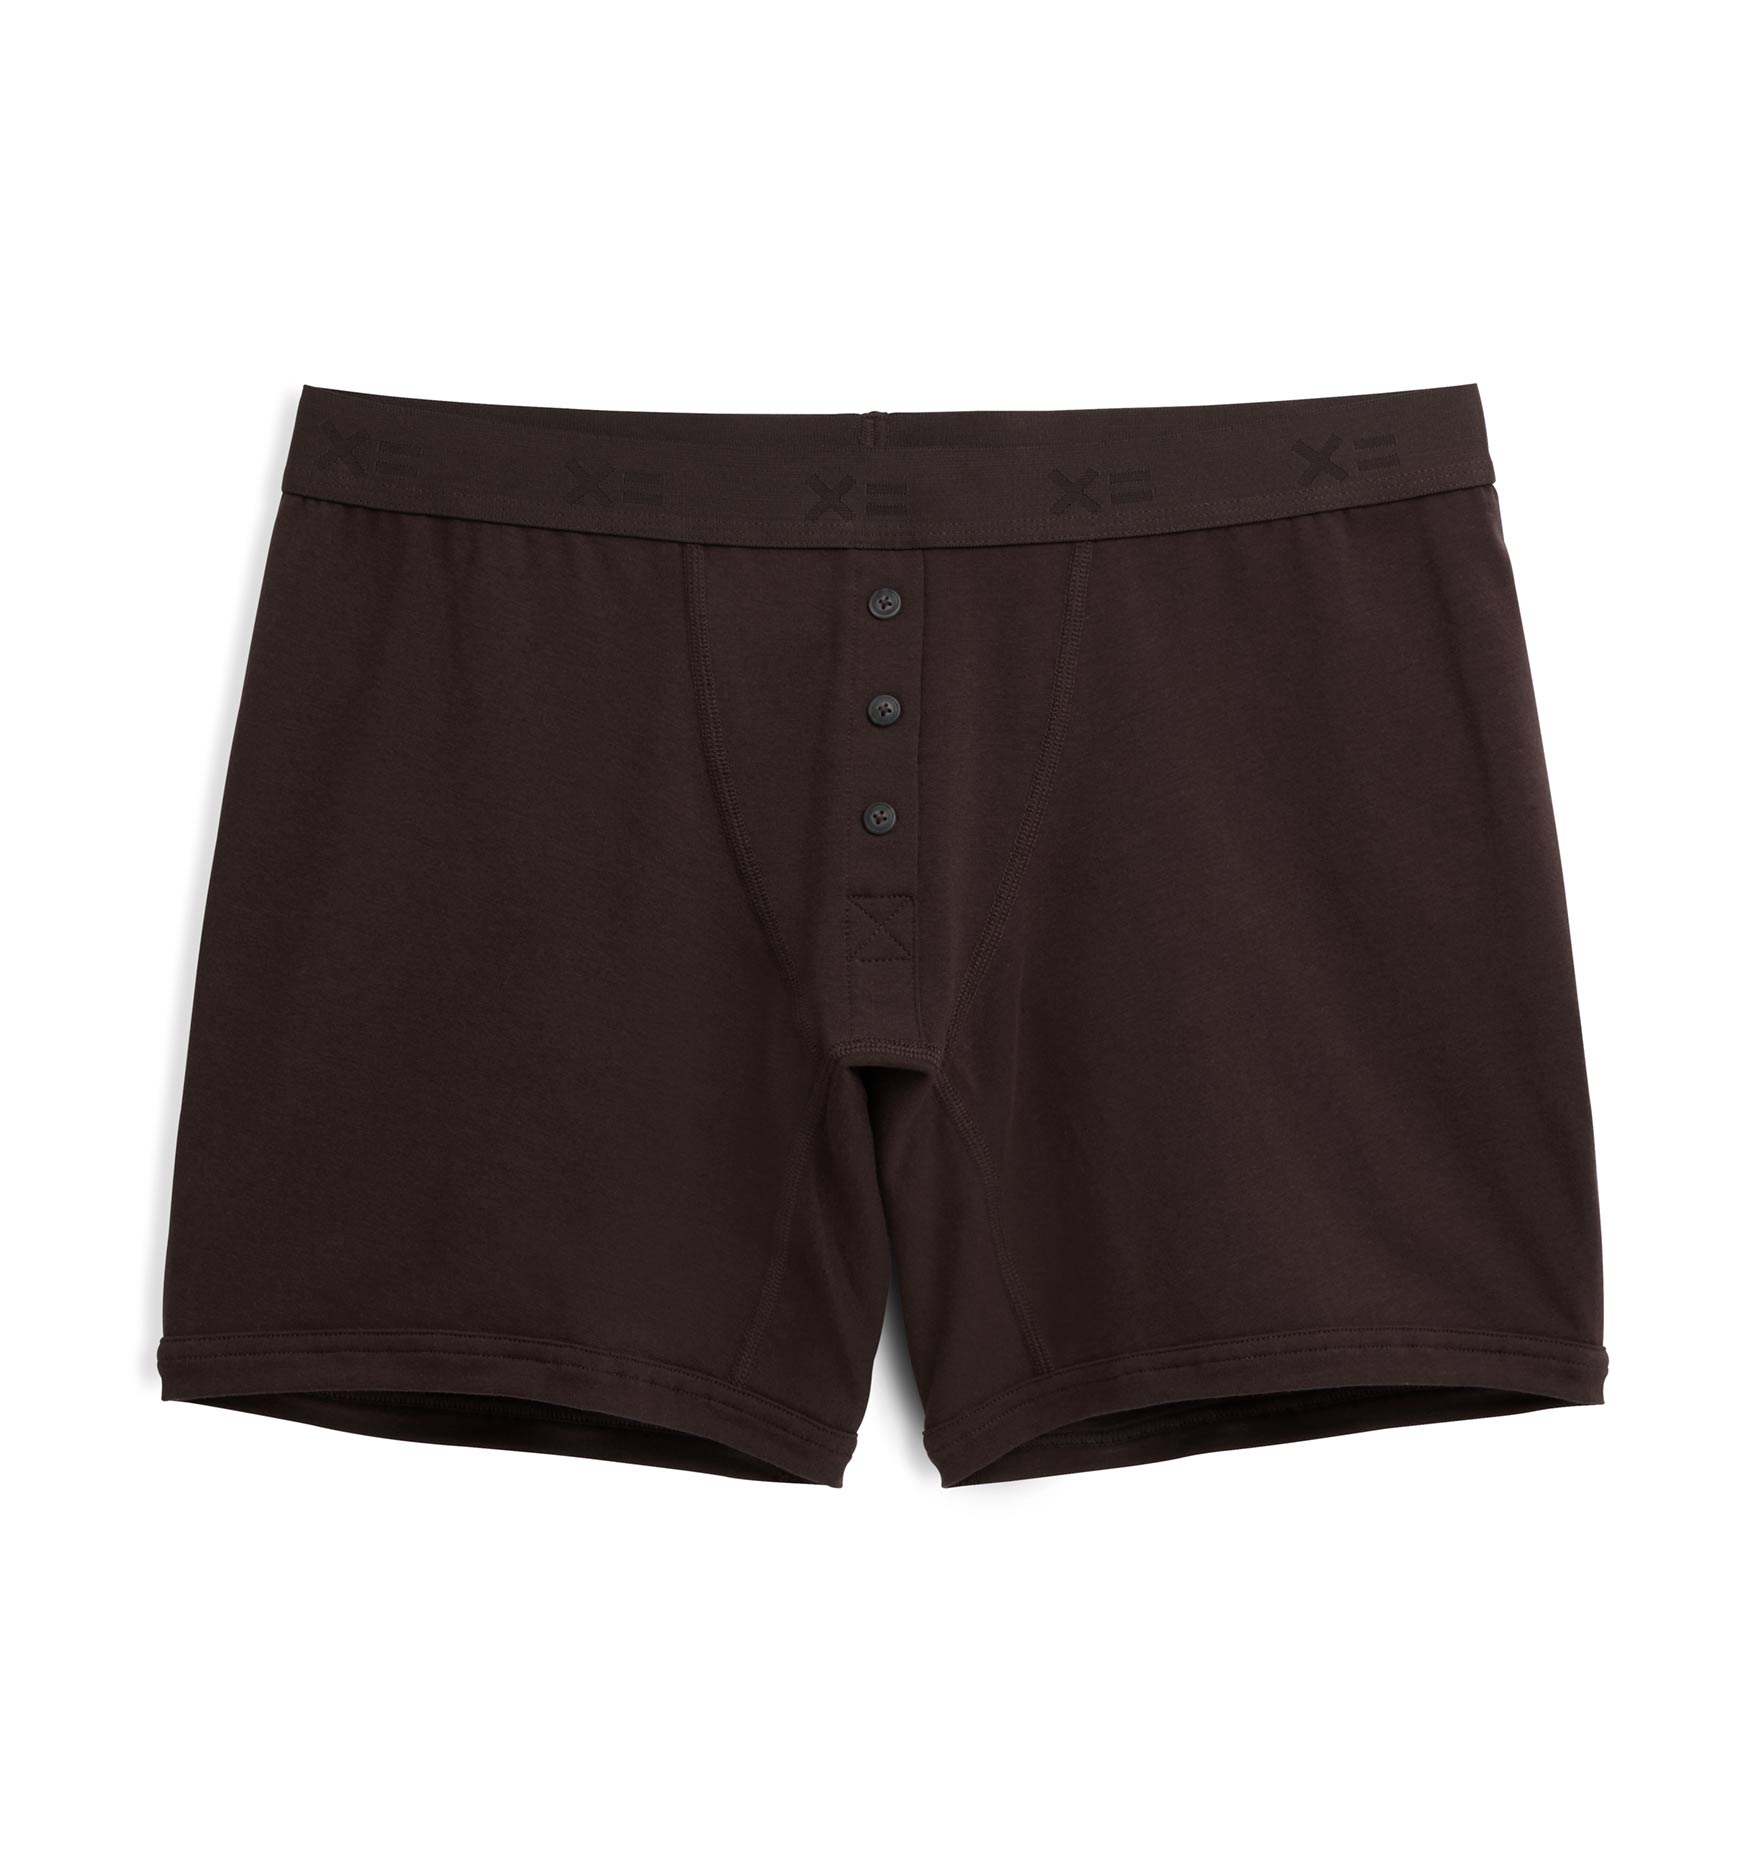 6" Fly Boxer Briefs - Java